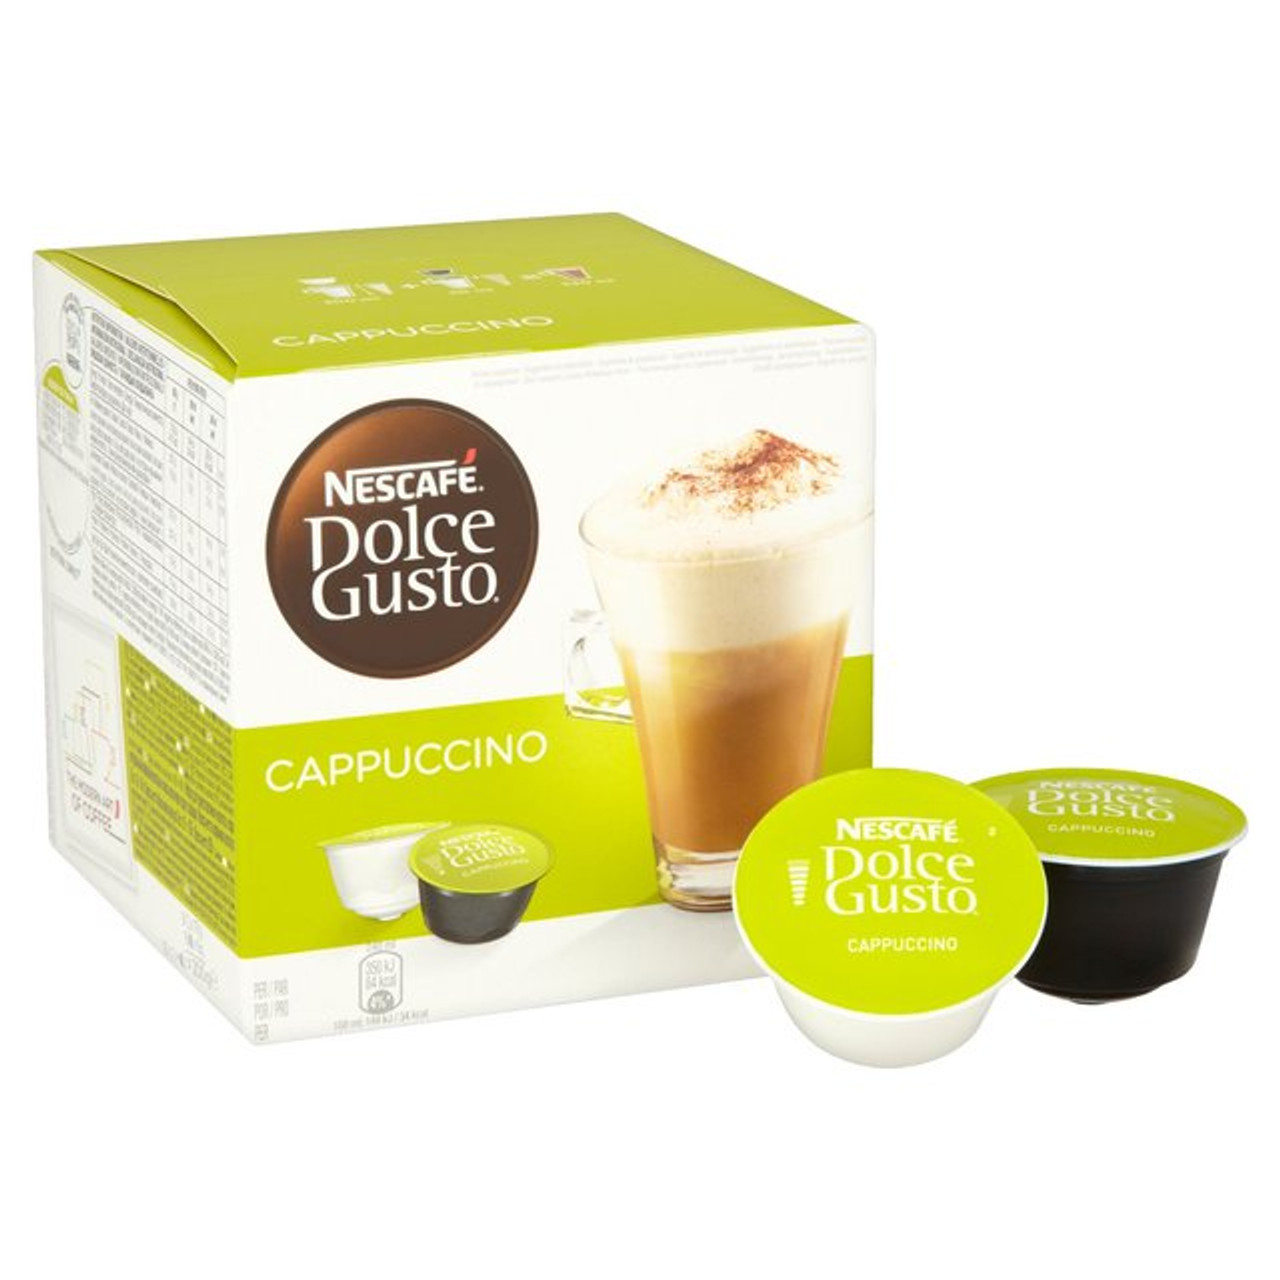 Dolce gusto cappuccino. Капсулы Dolce gusto Cappuccino. Капсулы Дольче густо капучино. Нескафе Дольче густо капсулы капучино. Нескафе Дольче густо капсулы.